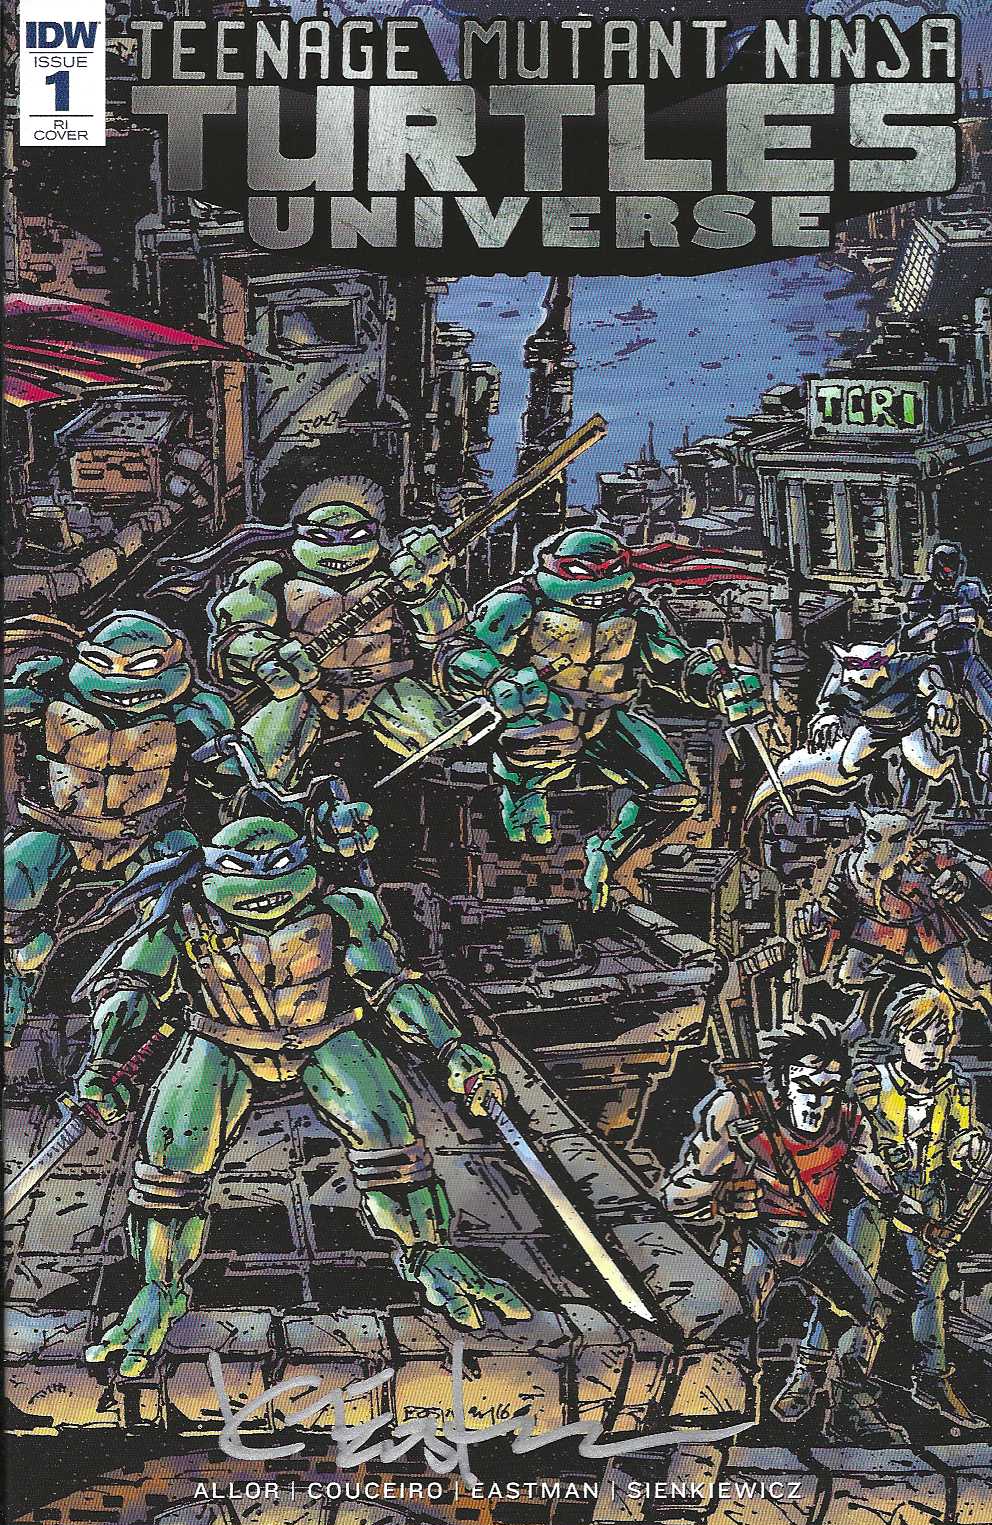 TMNT UNIVERSE #1 RE Eastman Cover – SIGNED